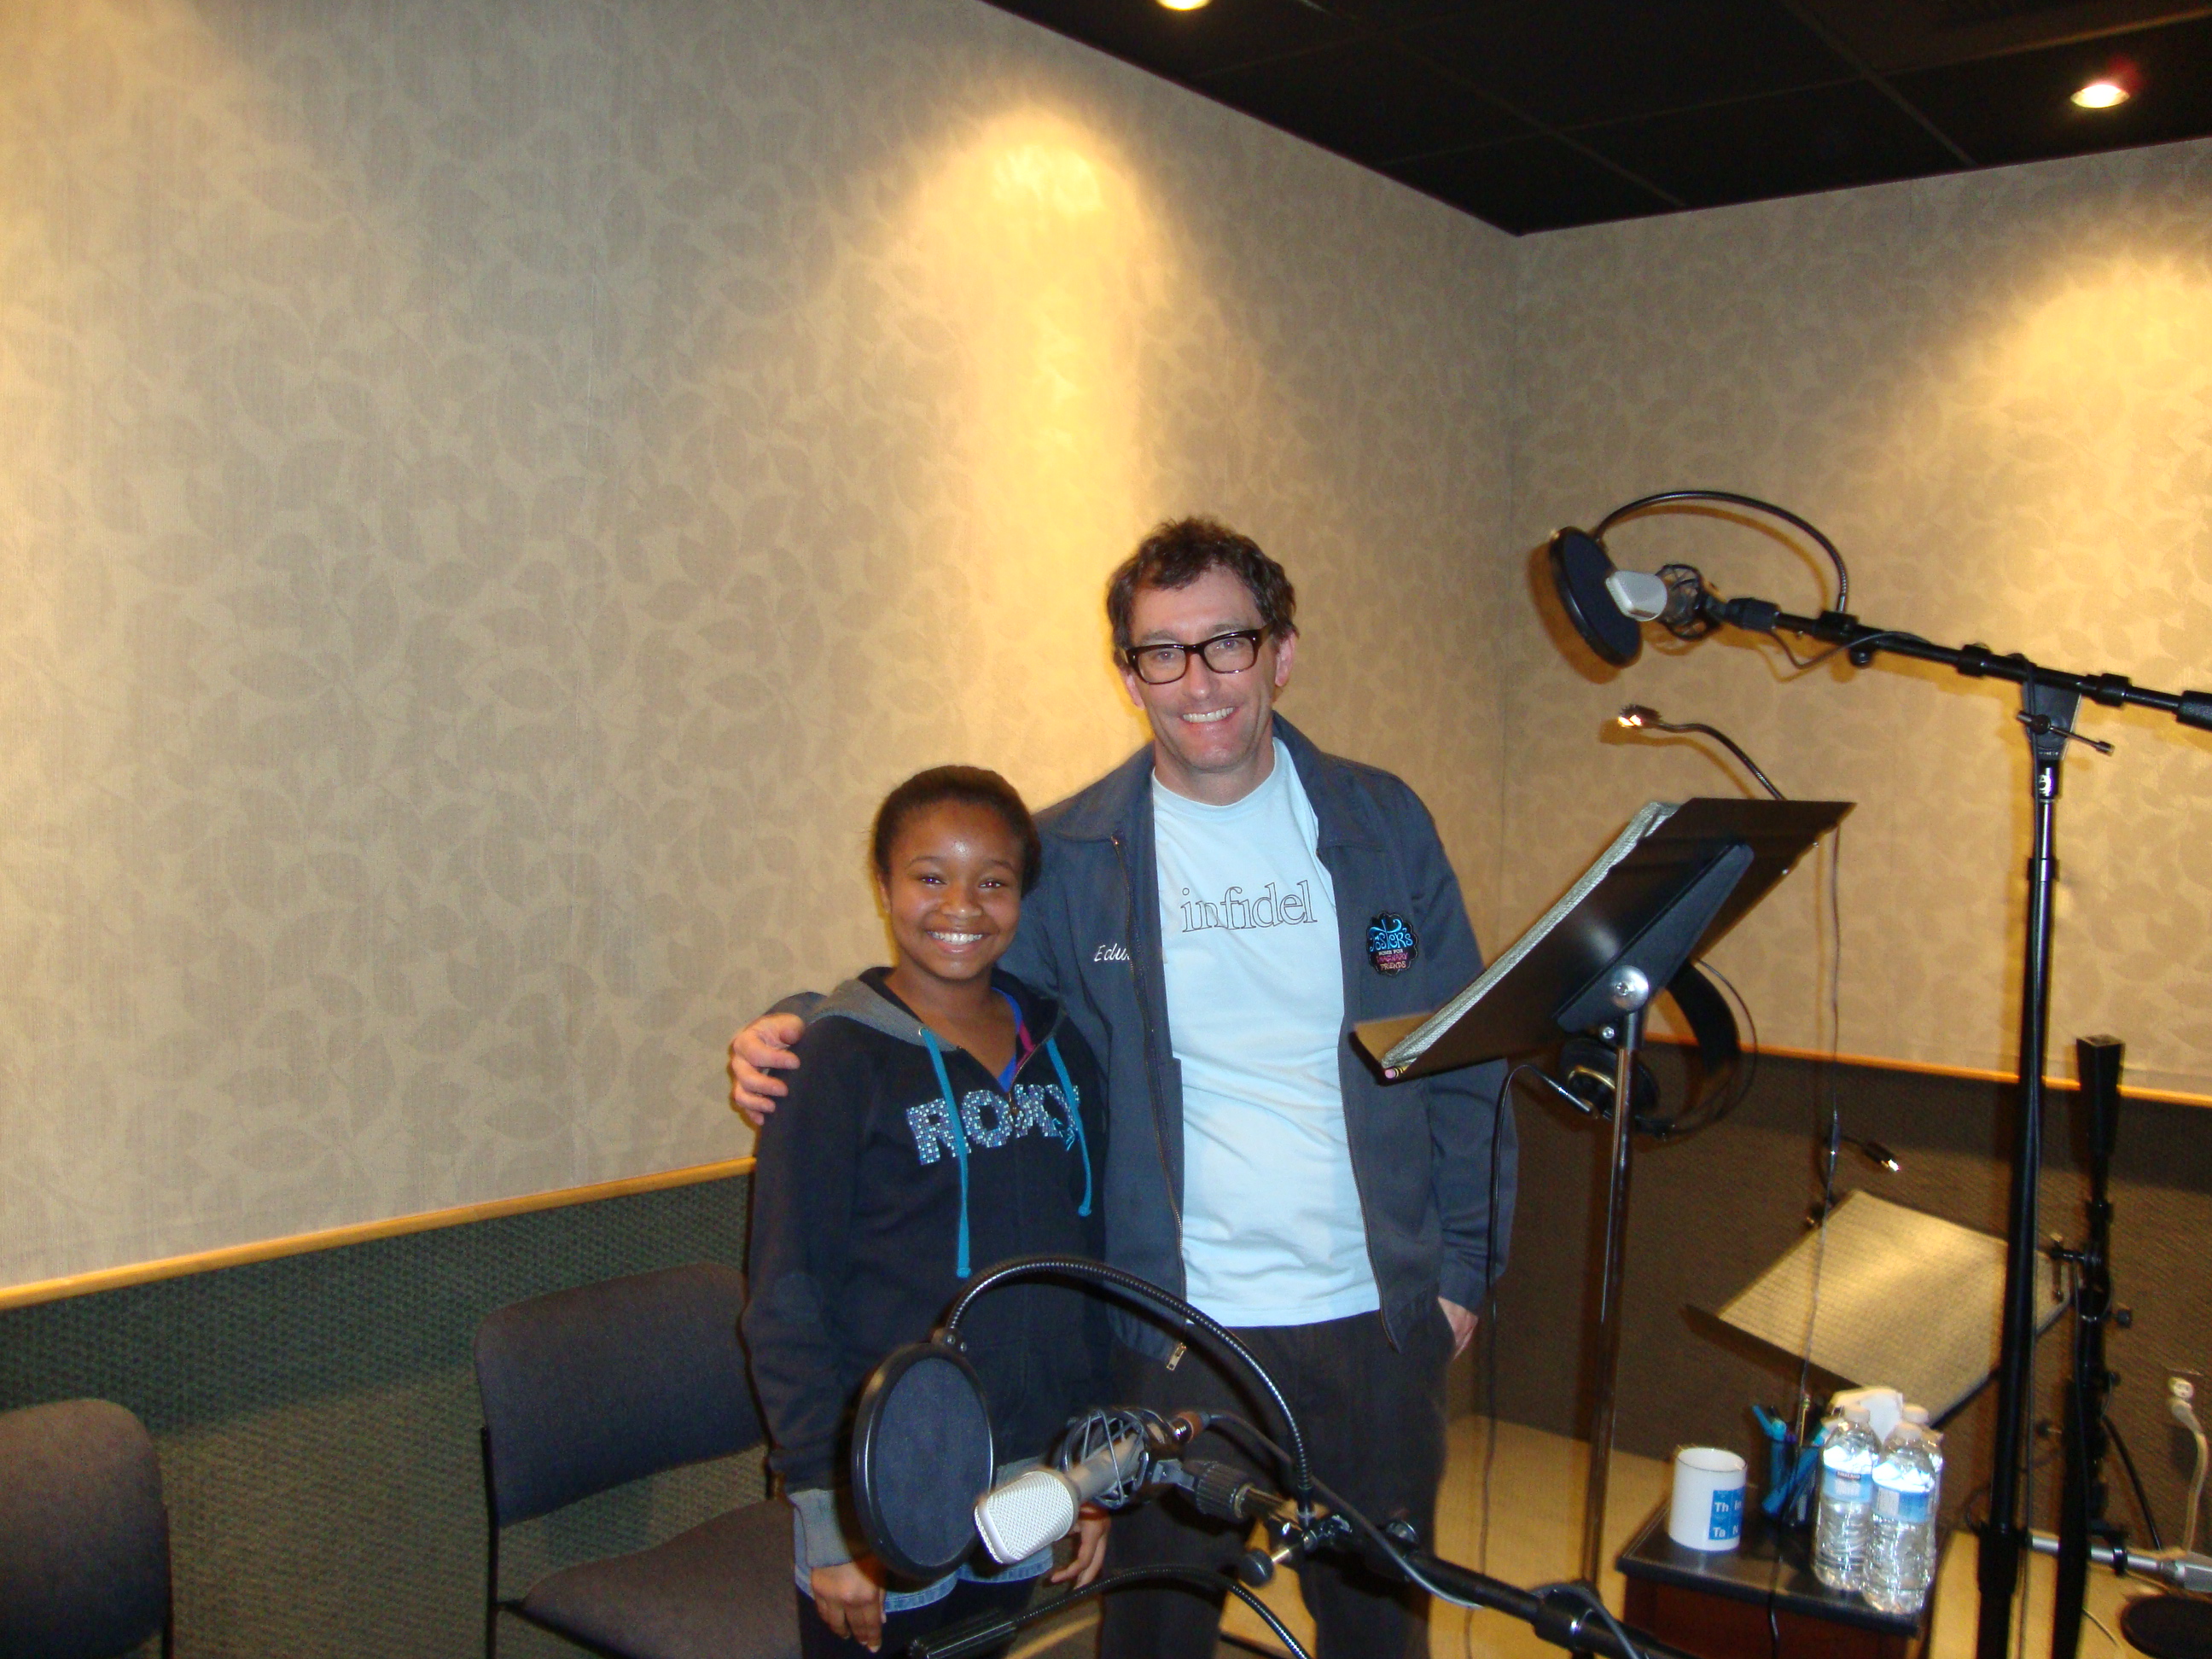 Kiara with Tom Kenny (the voice of SpongeBob) on the set of Doc McStuffins